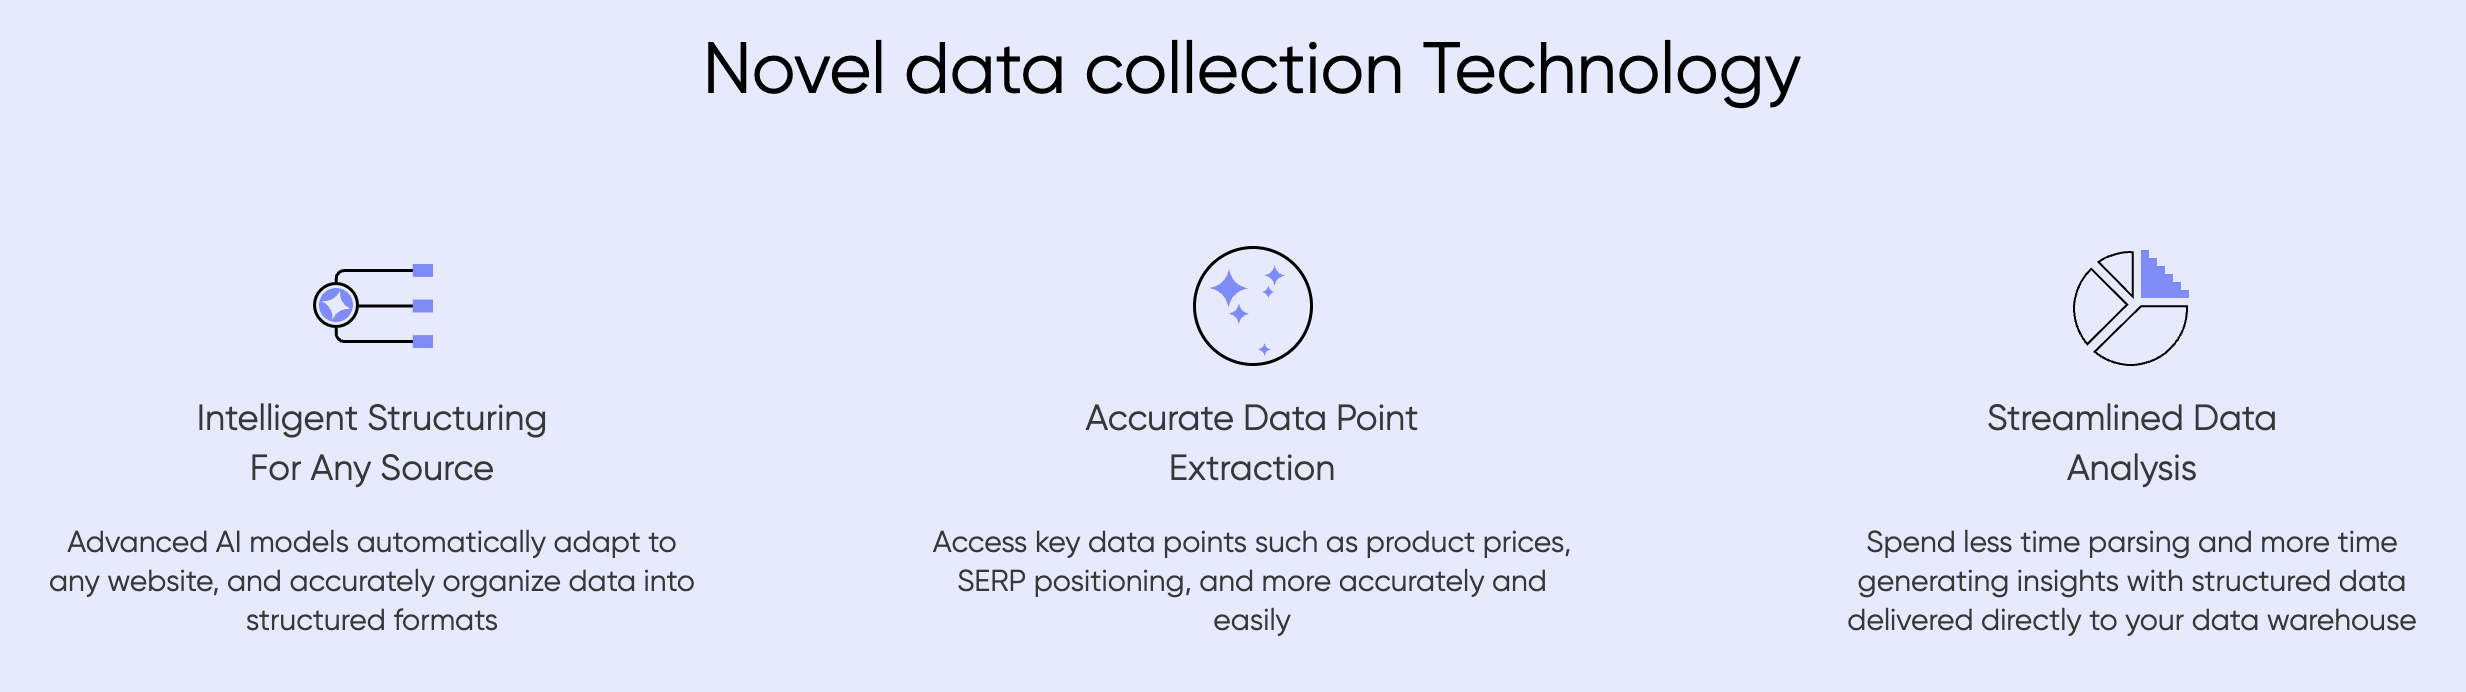 Data Collection Technology